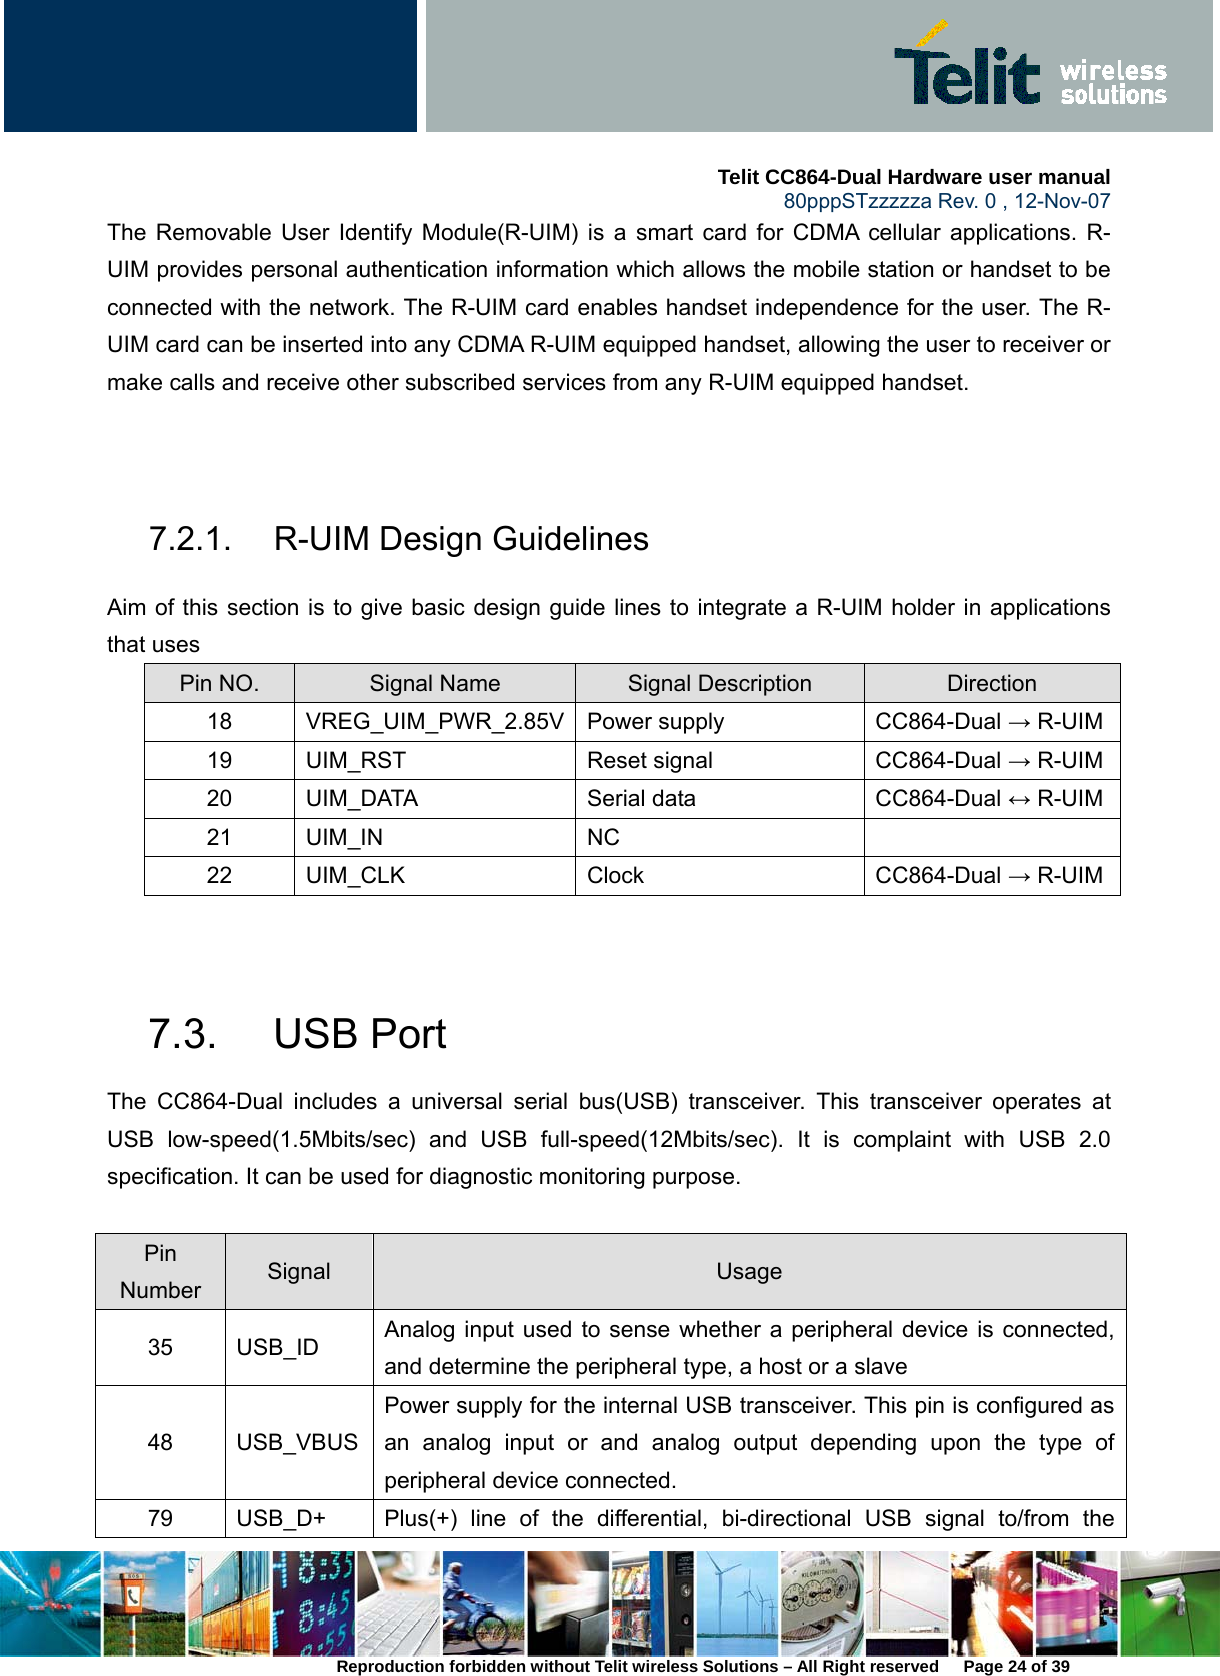     Telit CC864-Dual Hardware user manual   80pppSTzzzzza Rev. 0 , 12-Nov-07 Reproduction forbidden without Telit wireless Solutions – All Right reserved      Page 24 of 39 The Removable User Identify Module(R-UIM) is a smart card for CDMA cellular applications. R-UIM provides personal authentication information which allows the mobile station or handset to be connected with the network. The R-UIM card enables handset independence for the user. The R-UIM card can be inserted into any CDMA R-UIM equipped handset, allowing the user to receiver or make calls and receive other subscribed services from any R-UIM equipped handset.     7.2.1. R-UIM Design Guidelines Aim of this section is to give basic design guide lines to integrate a R-UIM holder in applications that uses   Pin NO.  Signal Name  Signal Description  Direction 18 VREG_UIM_PWR_2.85V Power supply  CC864-Dual → R-UIM19 UIM_RST  Reset signal  CC864-Dual → R-UIM20 UIM_DATA  Serial data  CC864-Dual ↔ R-UIM21 UIM_IN  NC   22 UIM_CLK  Clock  CC864-Dual → R-UIM  7.3. USB Port The CC864-Dual includes a universal serial bus(USB) transceiver. This transceiver operates at USB low-speed(1.5Mbits/sec) and USB full-speed(12Mbits/sec). It is complaint with USB 2.0 specification. It can be used for diagnostic monitoring purpose.    Pin Number  Signal  Usage 35 USB_ID Analog input used to sense whether a peripheral device is connected, and determine the peripheral type, a host or a slave 48 USB_VBUSPower supply for the internal USB transceiver. This pin is configured as an analog input or and analog output depending upon the type of peripheral device connected. 79  USB_D+  Plus(+) line of the differential, bi-directional USB signal to/from the 